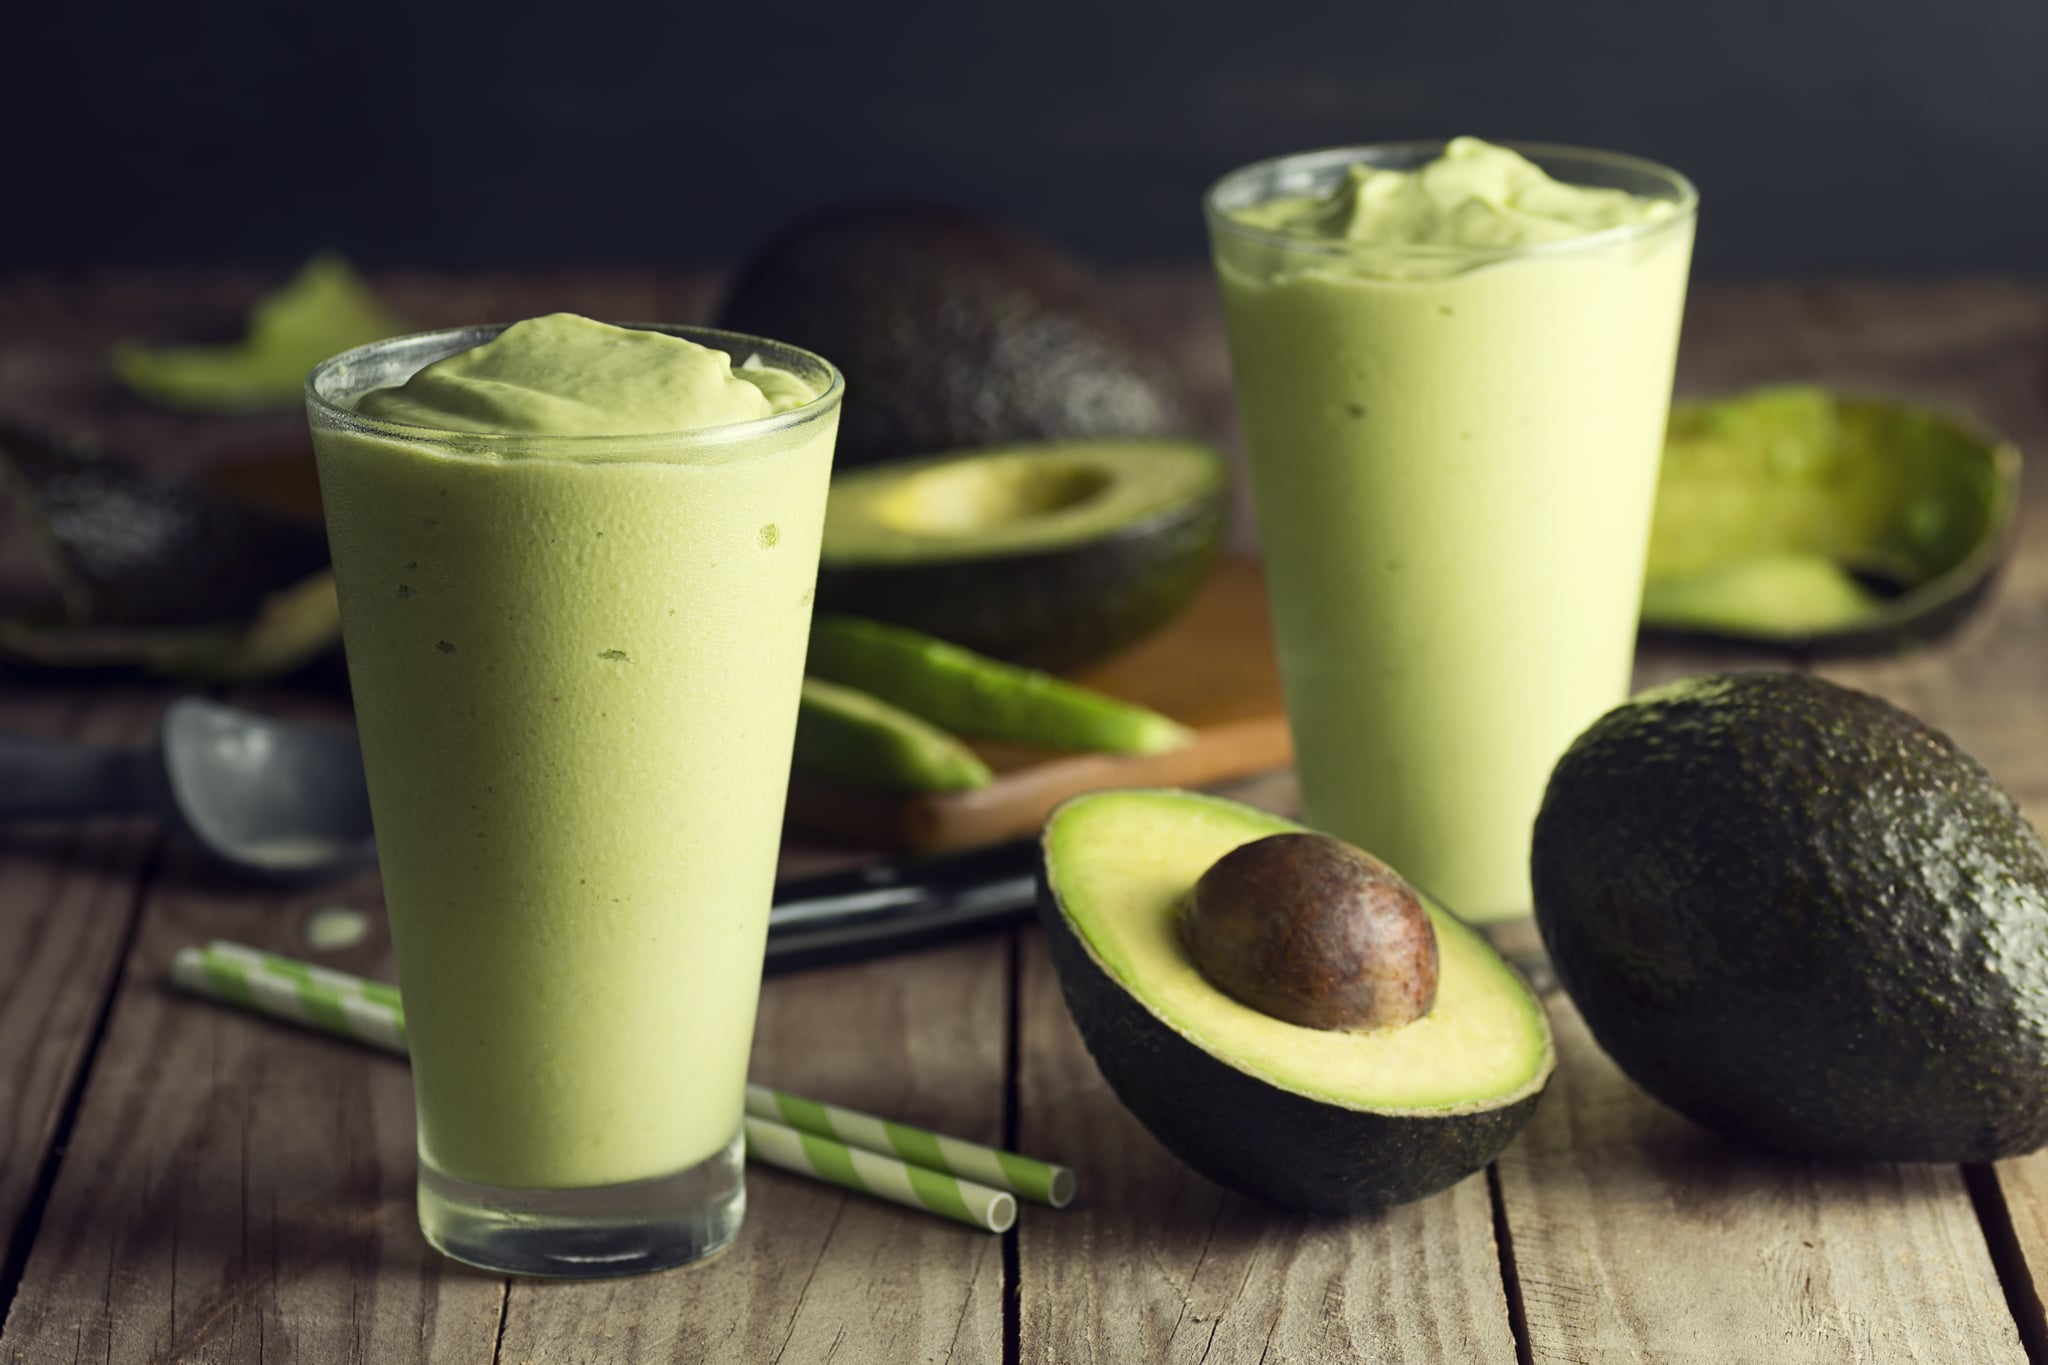 What Is The First Step Of Making The Avocado Juice Typical Of Pematangsiantar?